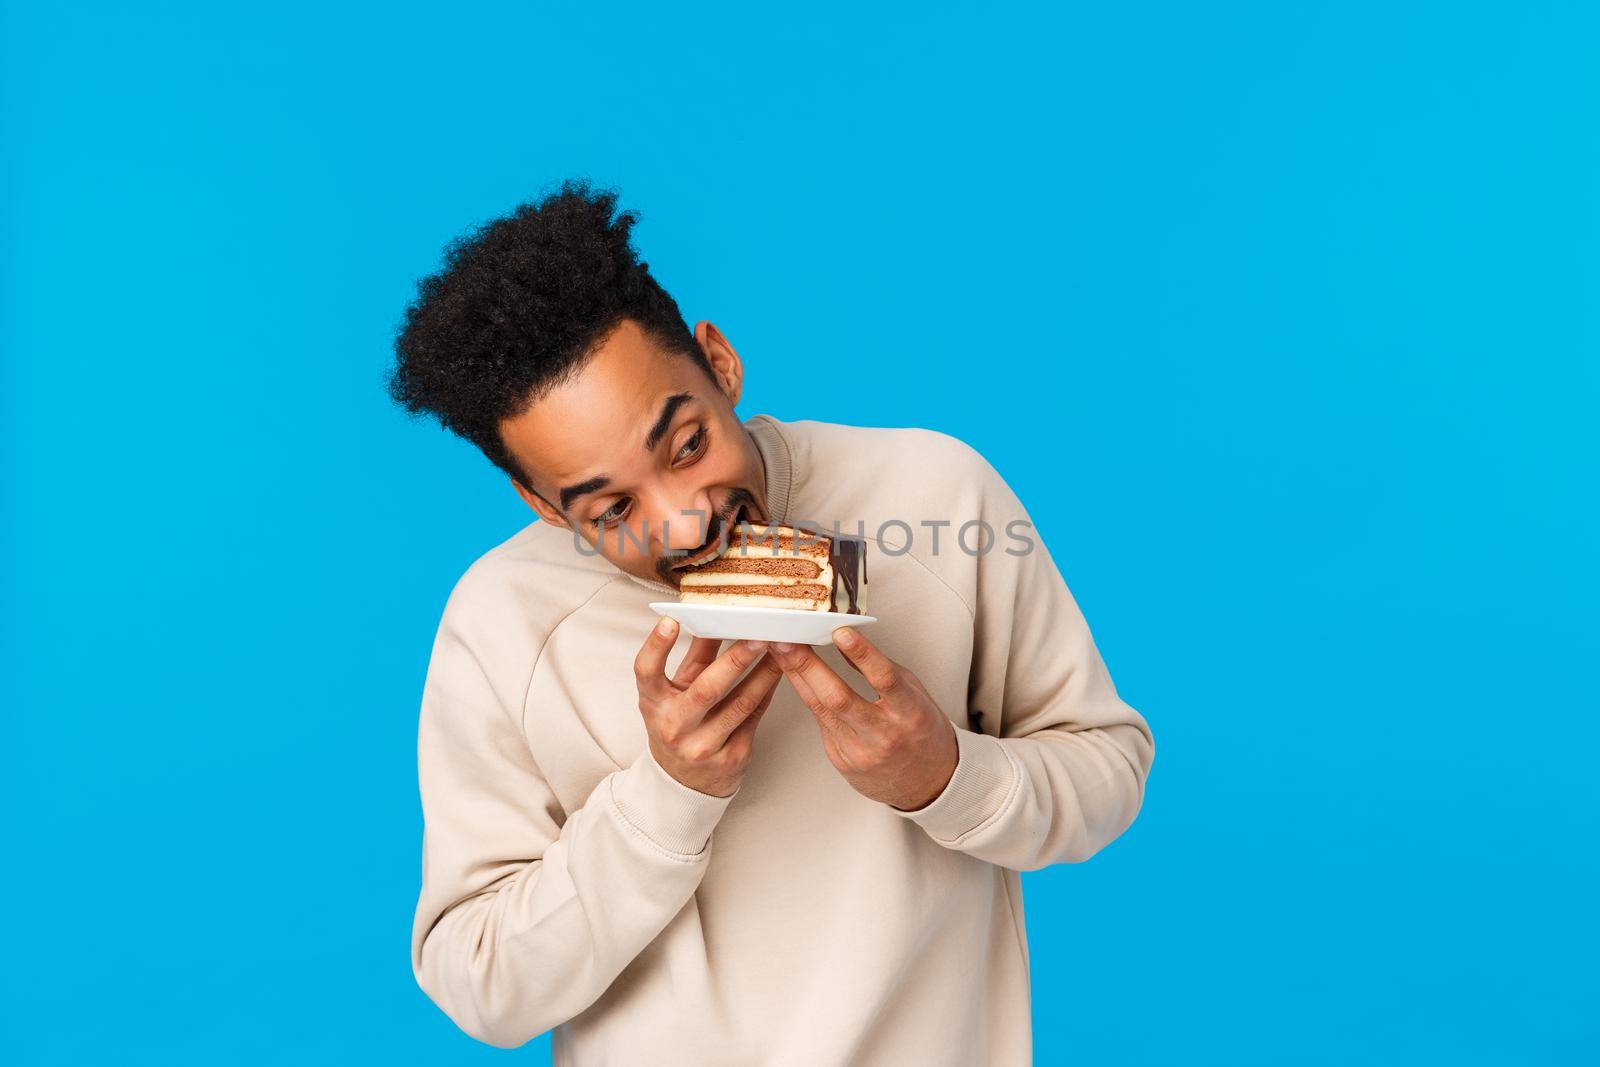 Guy stole piece cake and eating it fast. Funny and cute african-american man holding plate, bite delicious dessert celebrating birthday, enjoying holidays tasty food, standing blue background.